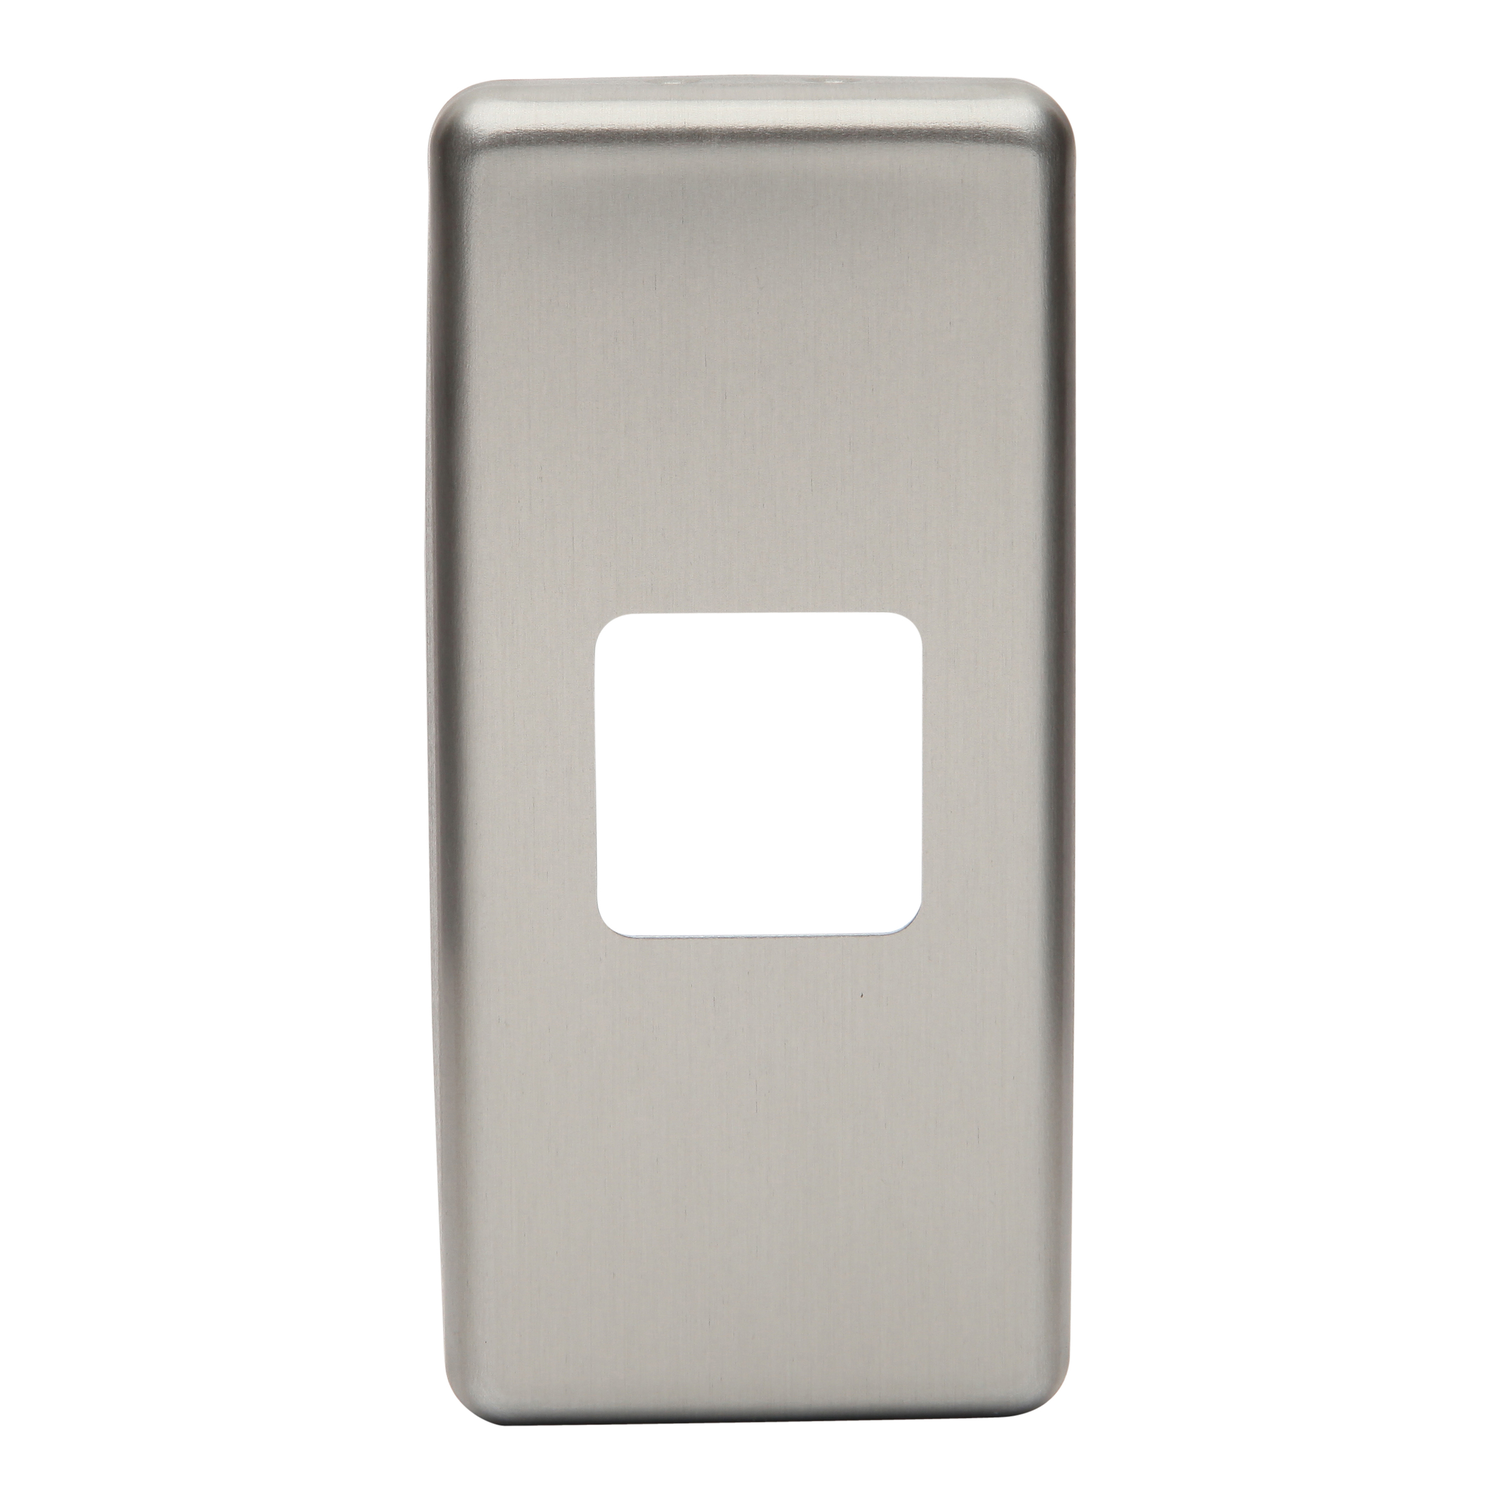 Switch Cover Plate; Metal, For Worktop 1-Apature Switch, Brushed Bronze